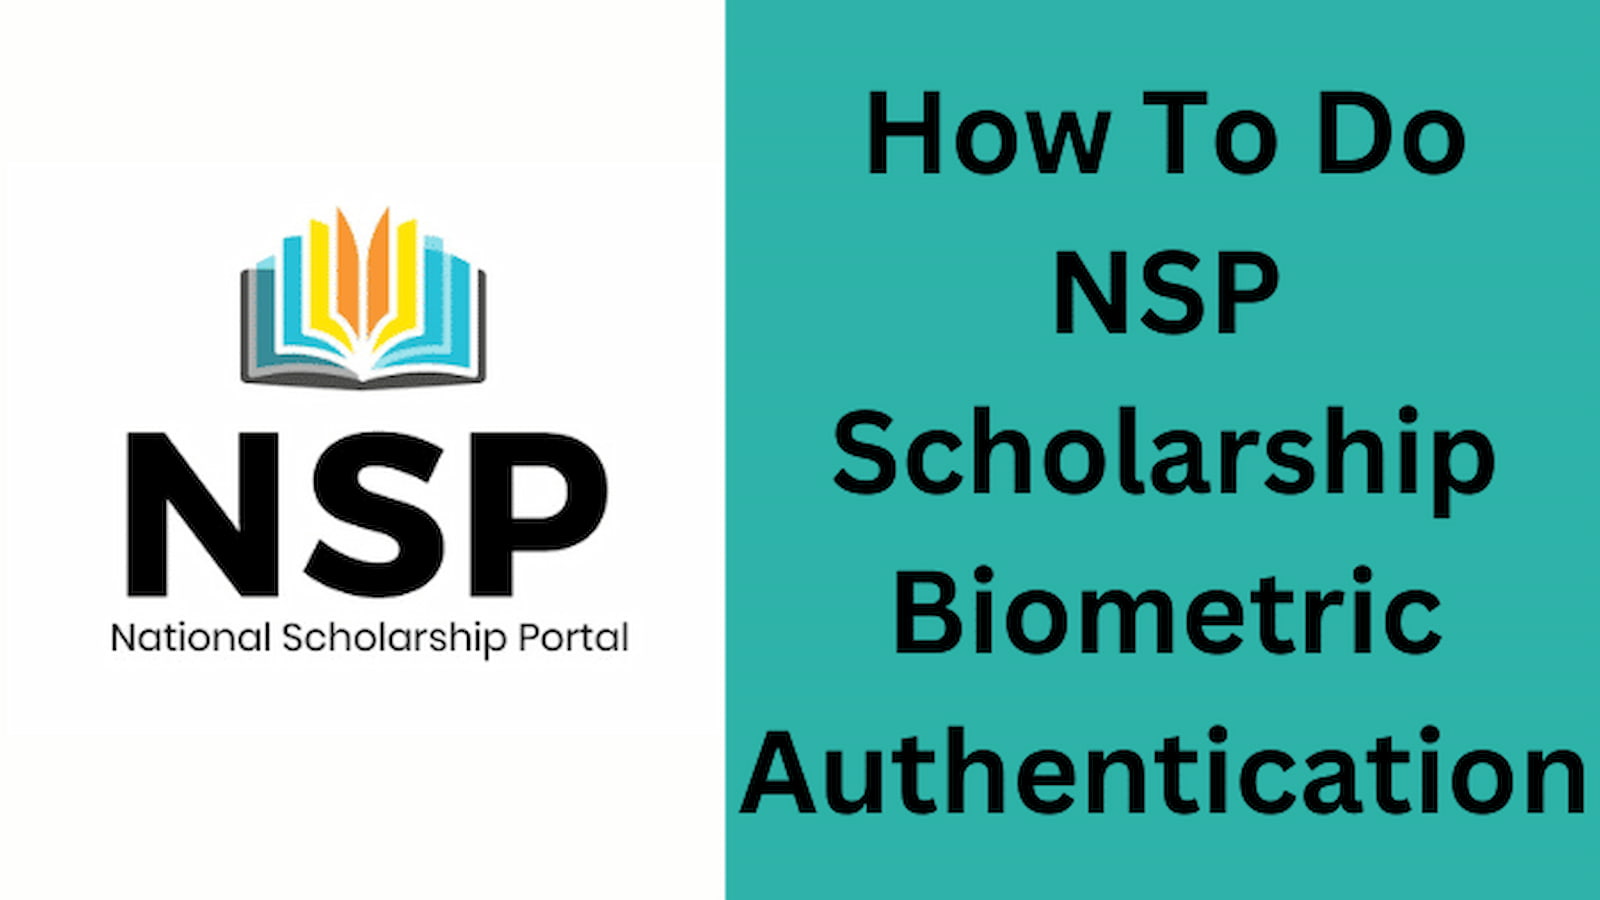 NSP Scholarship Biometric Authentication: Check Complete Guide